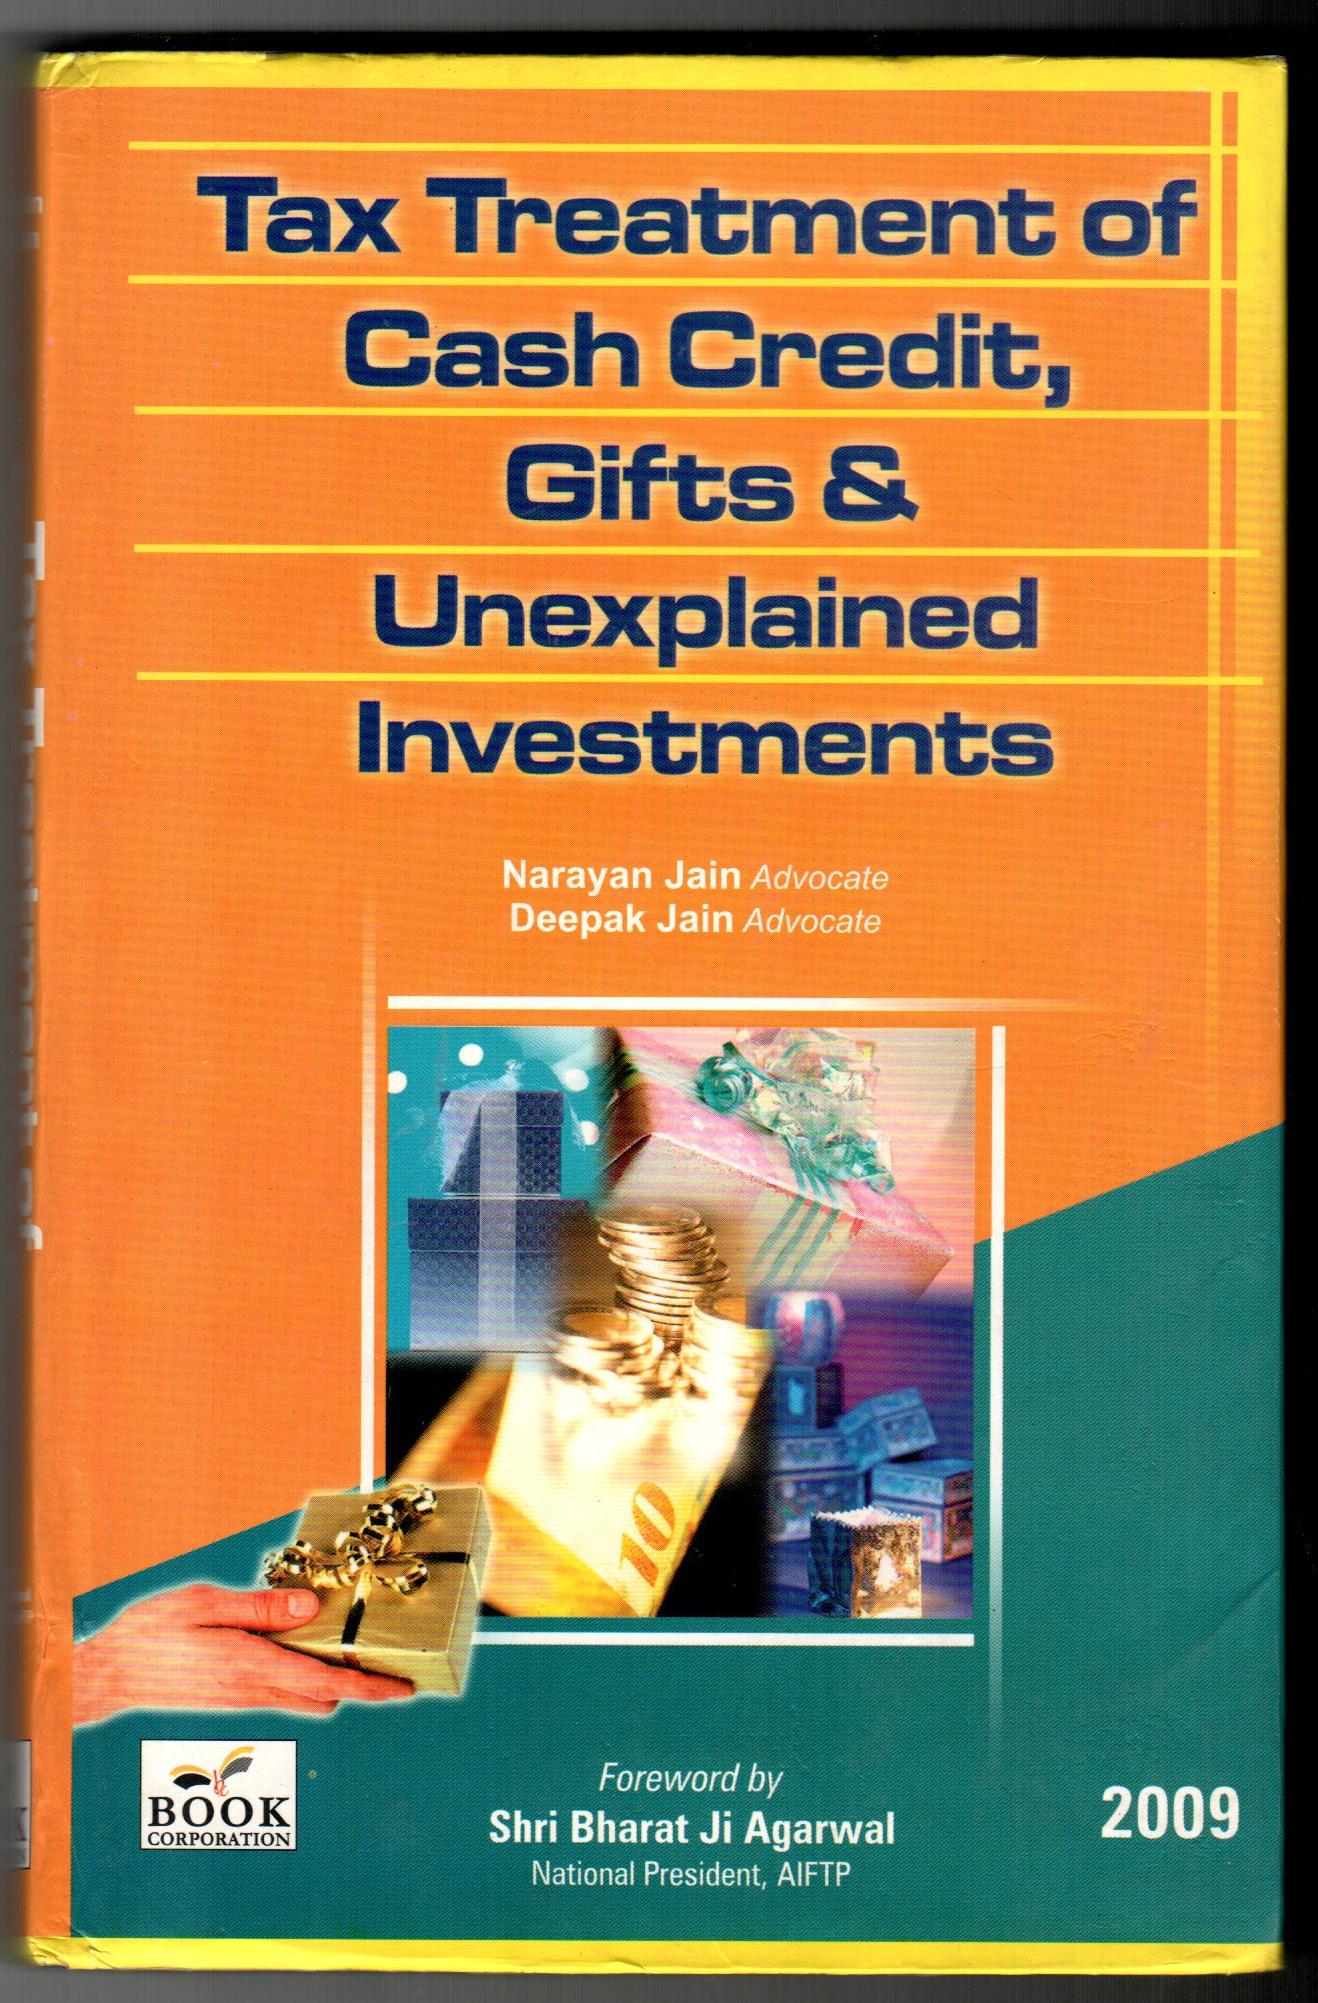 Tax Treatment of cash credit, gifts and unexplained investments